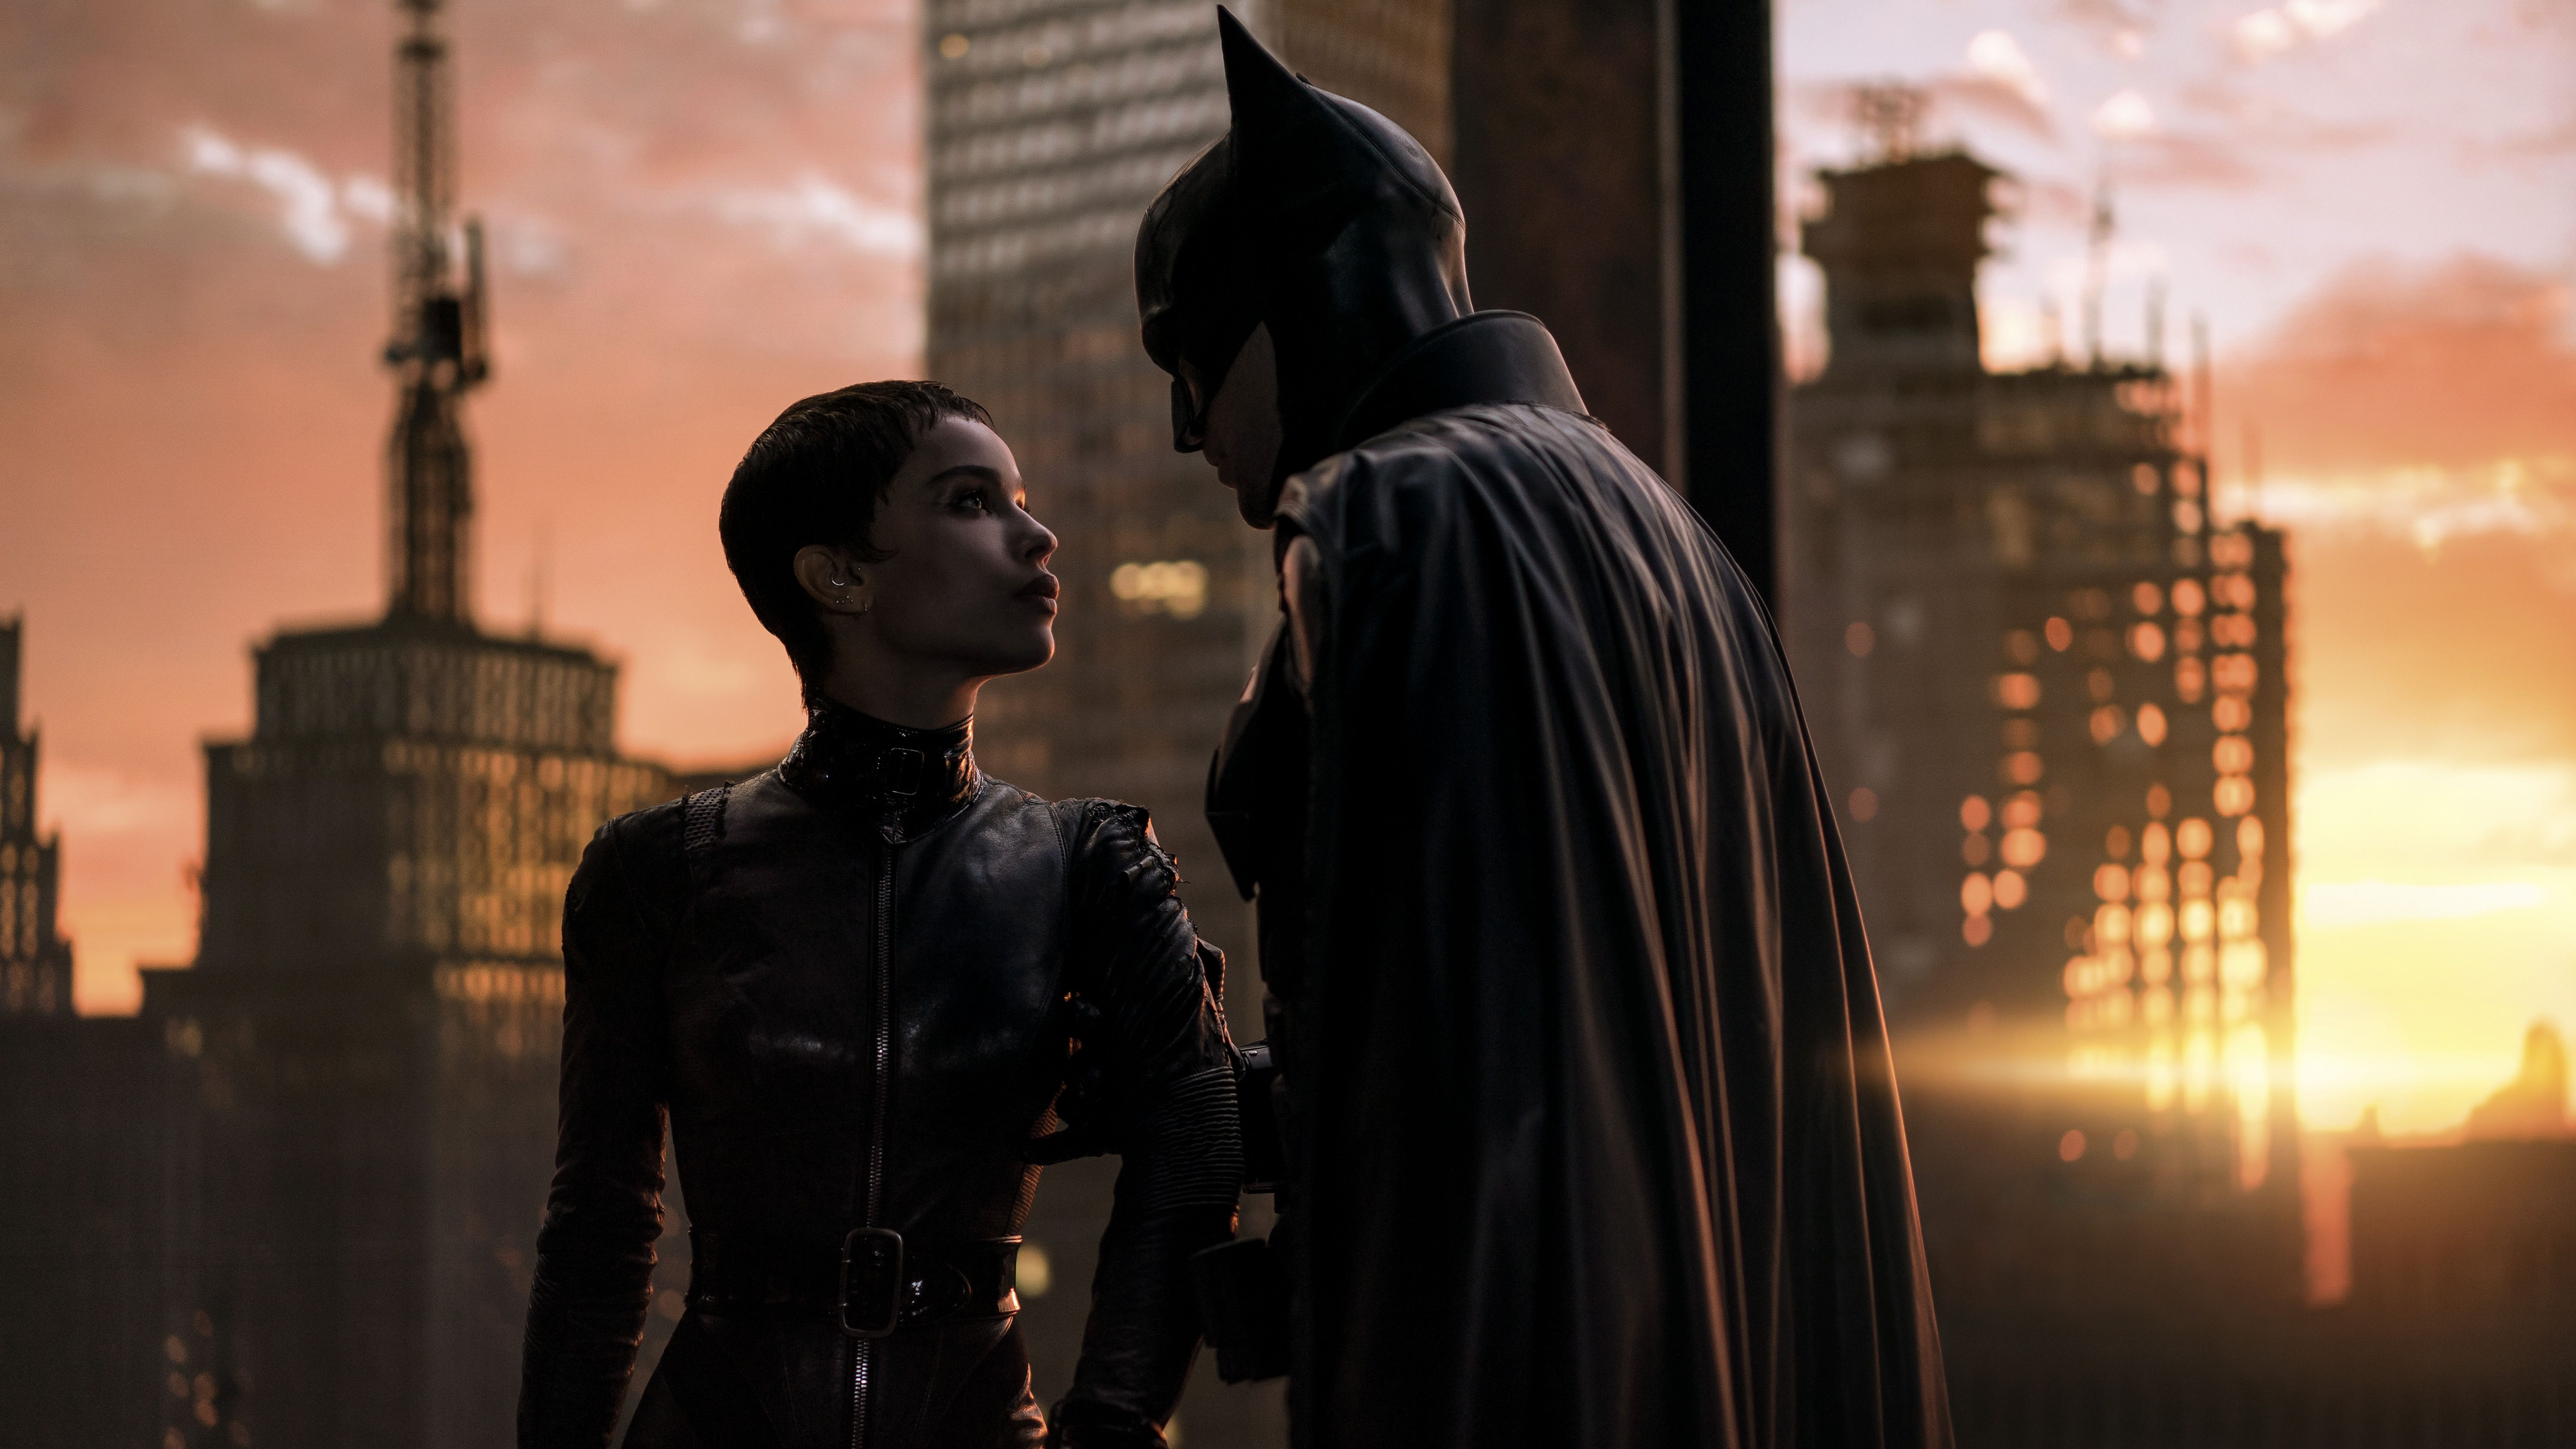 Where to Watch The Batman Online - How to Stream The Batman Movie 2022